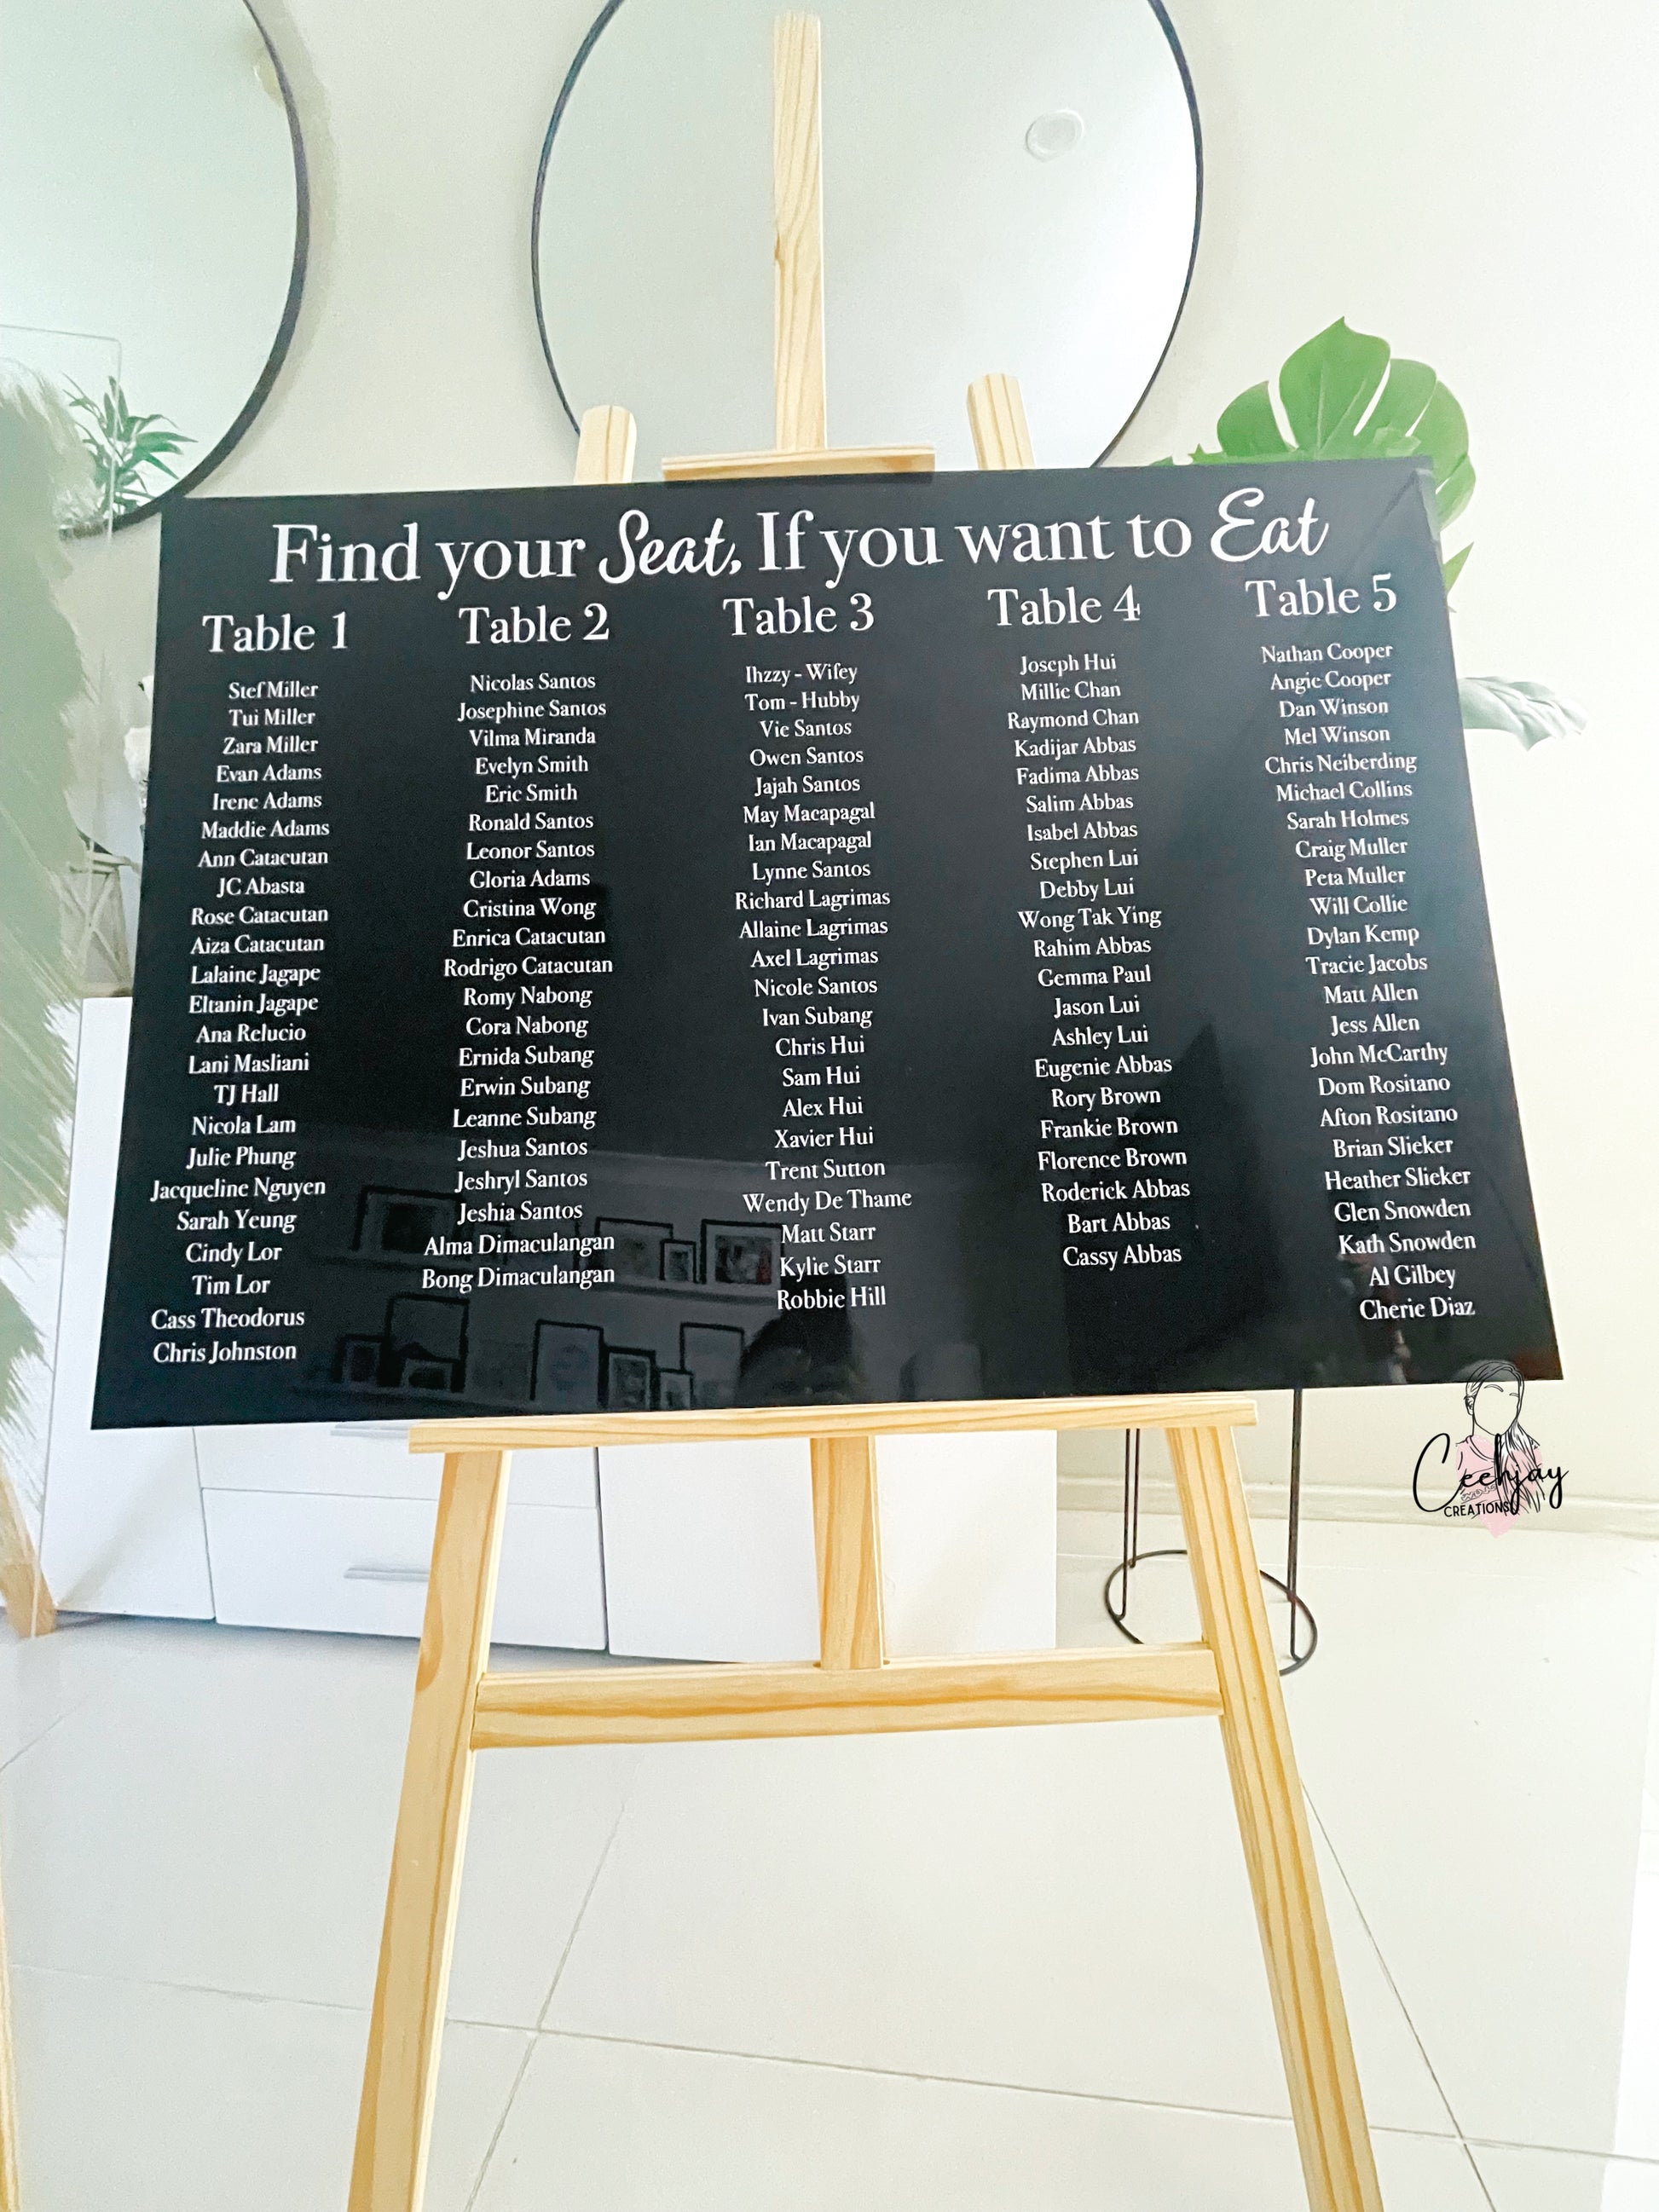 Please Find Your Seat Modern Clear Acrylic Sign – Rich Design Co